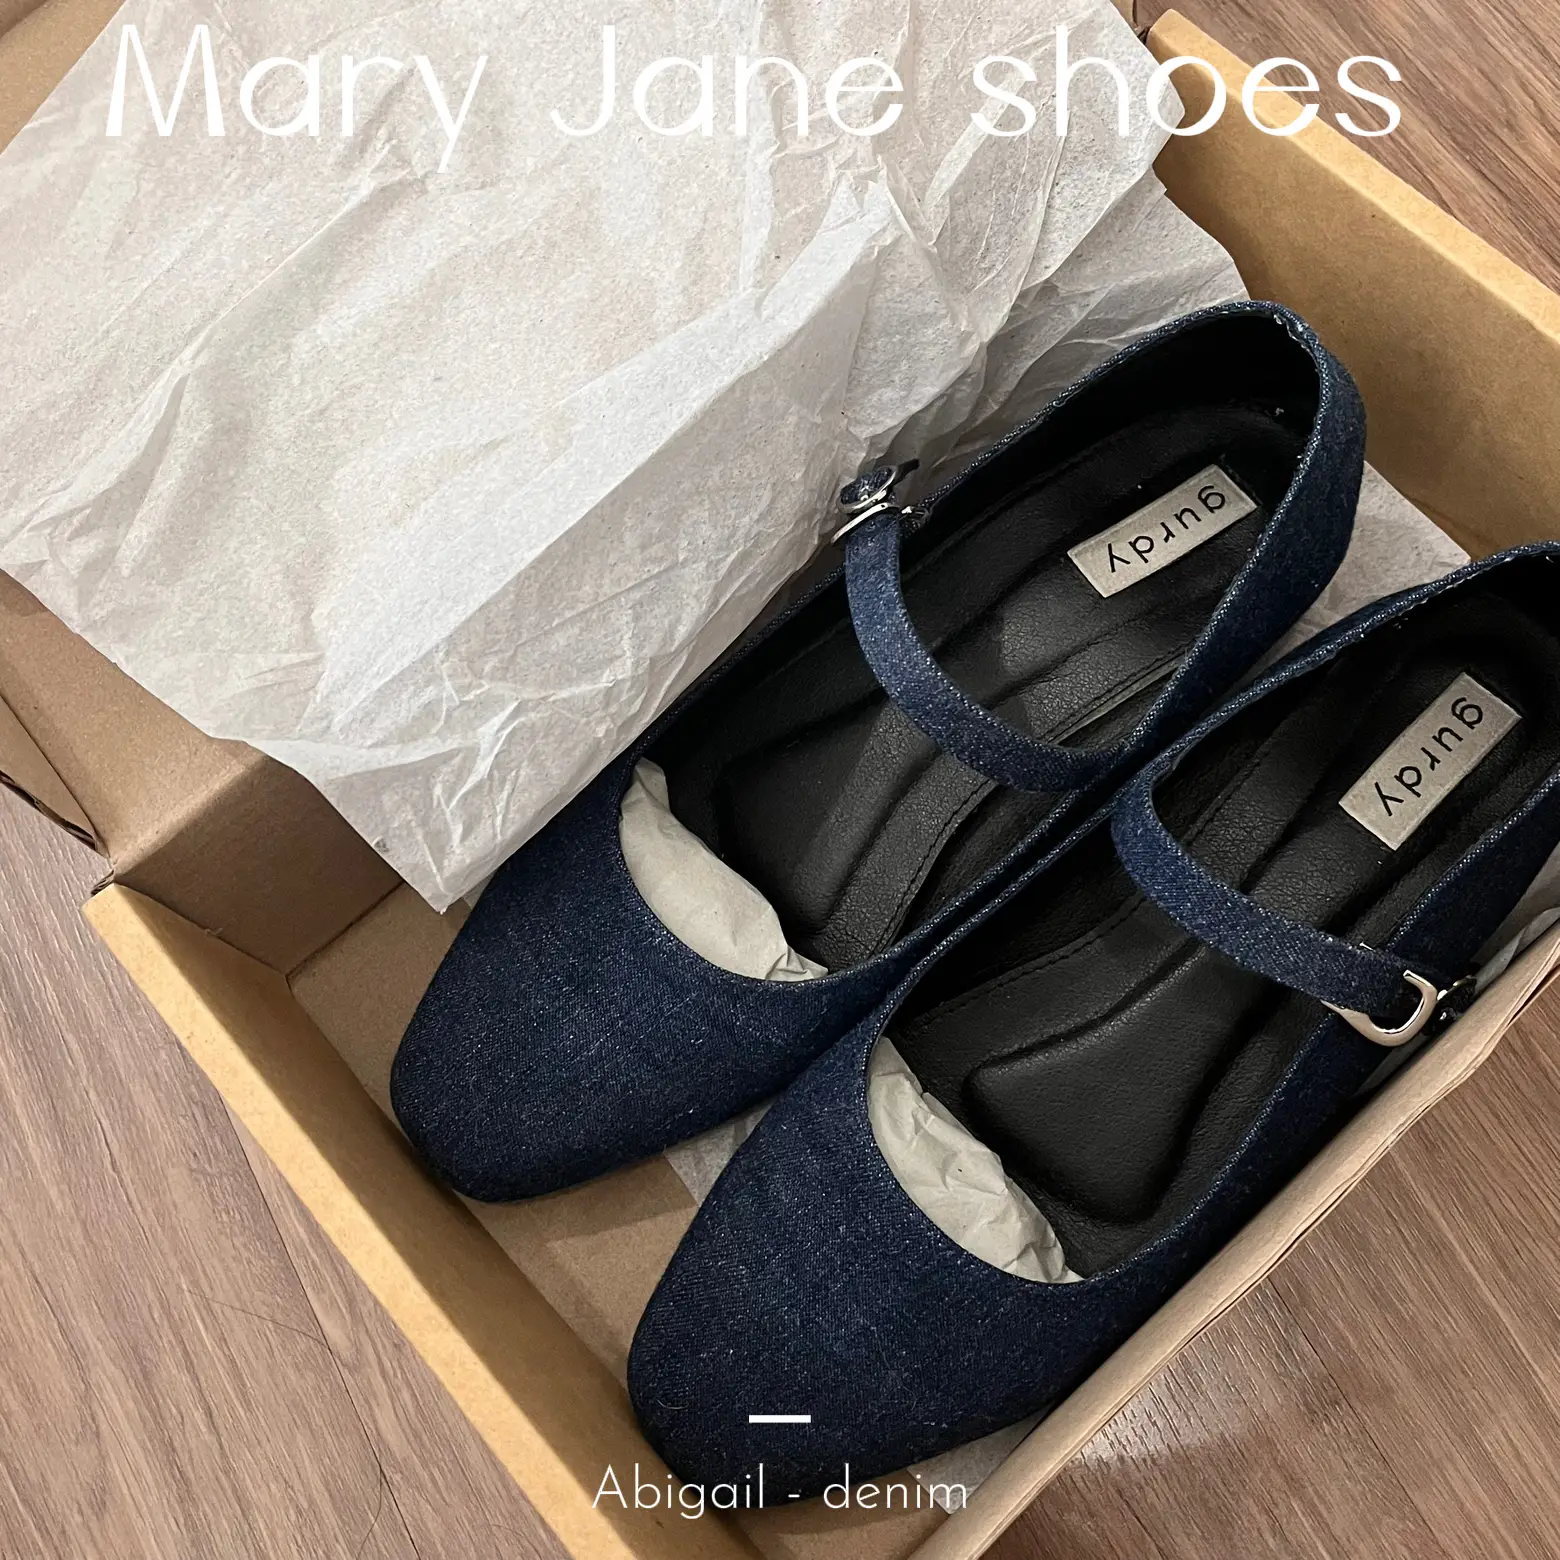 Mary Janes Are The Shoe Of The Summer